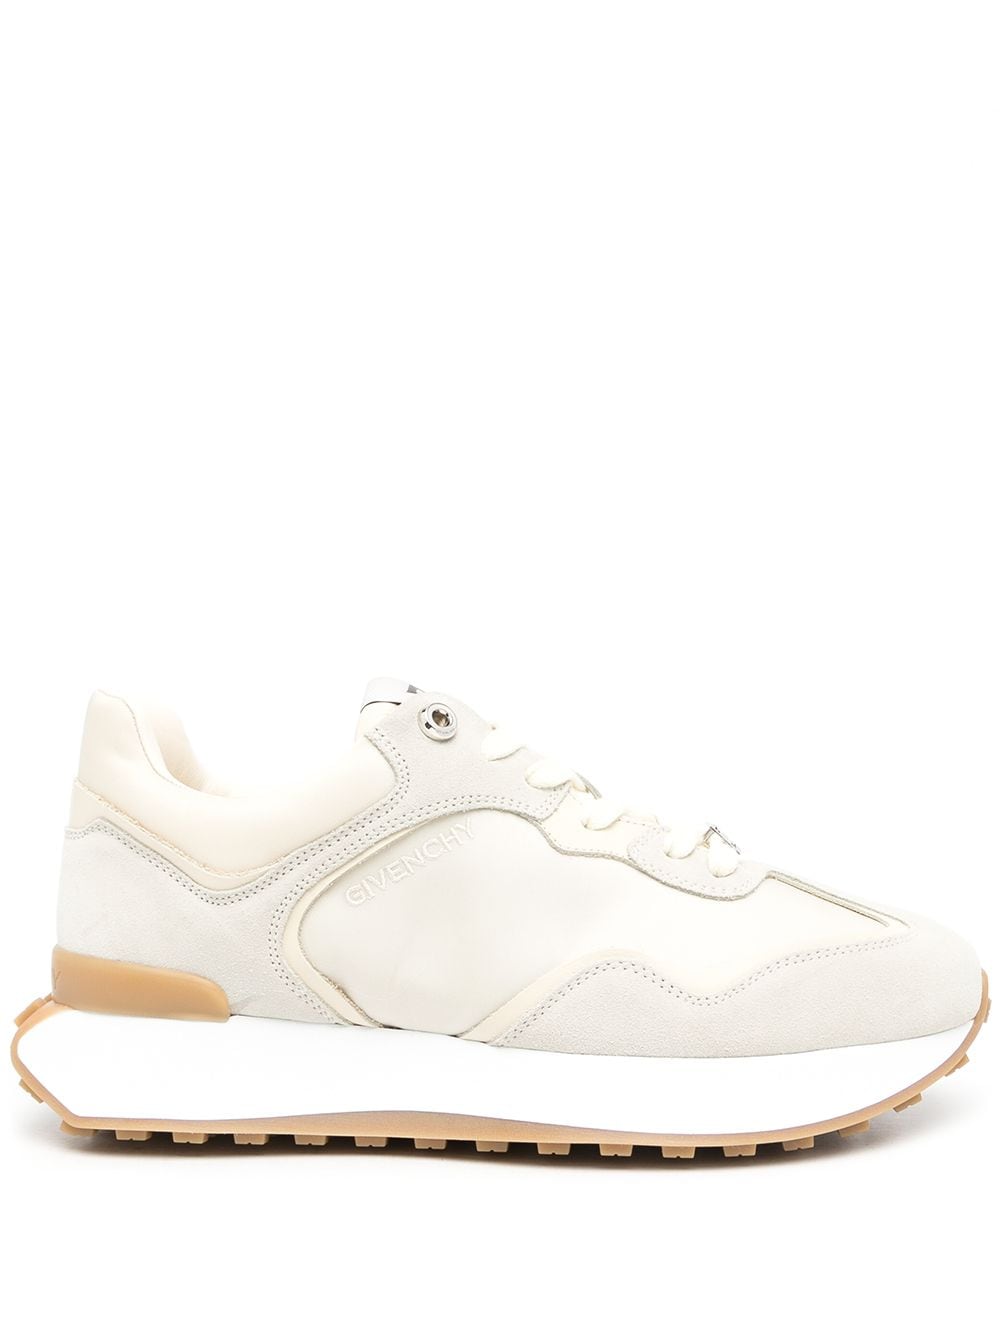 Givenchy Giv Runner low-top Sneakers - Farfetch